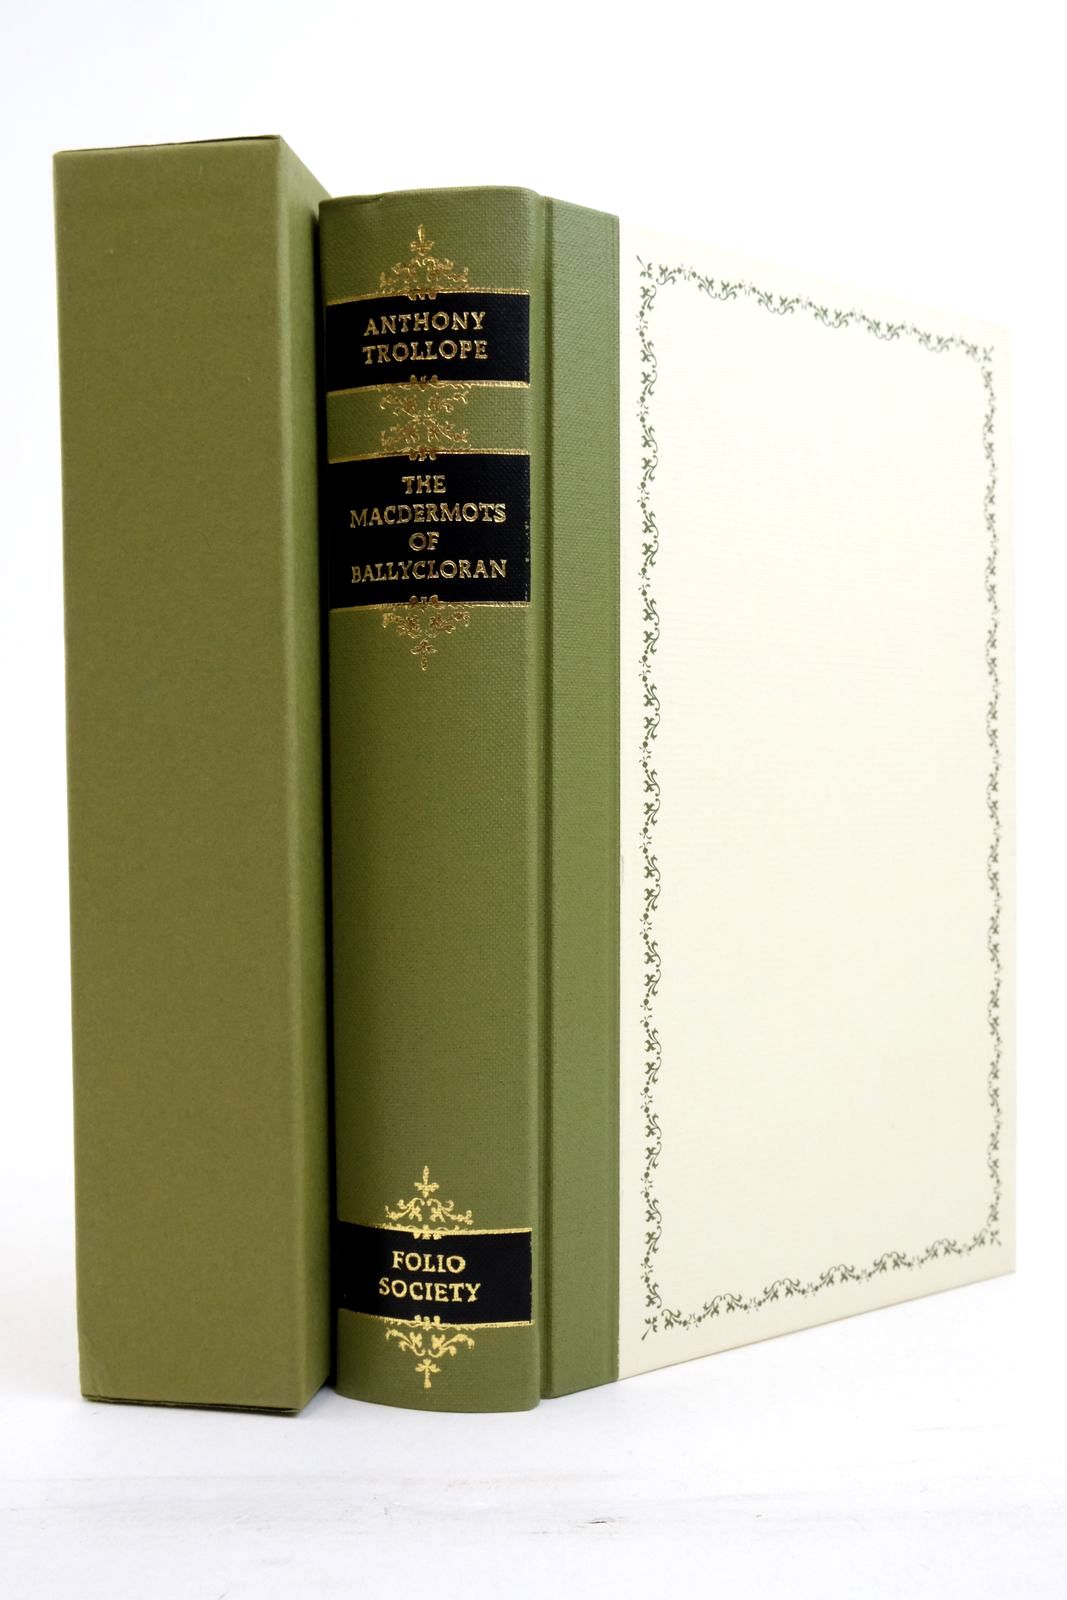 Photo of THE MACDERMOTS OF BALLYCLORAN written by Trollope, Anthony Edwards, Owen Dudley illustrated by Trimby, Elisa published by Folio Society (STOCK CODE: 2138231)  for sale by Stella & Rose's Books